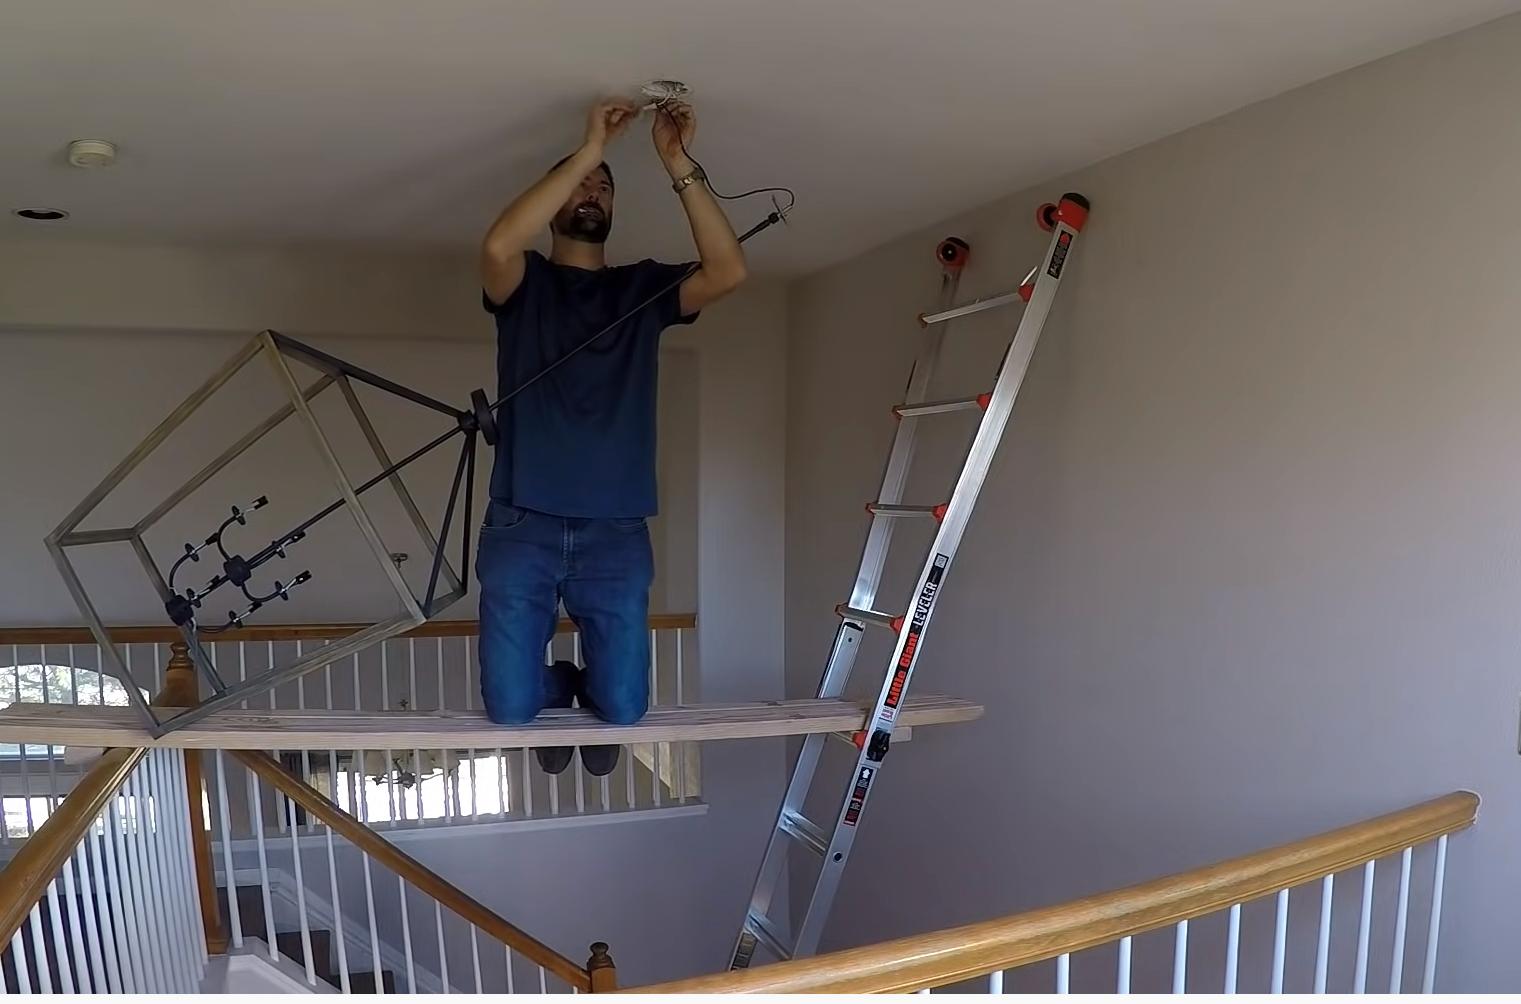 How To Change Bulb In A High Ceiling